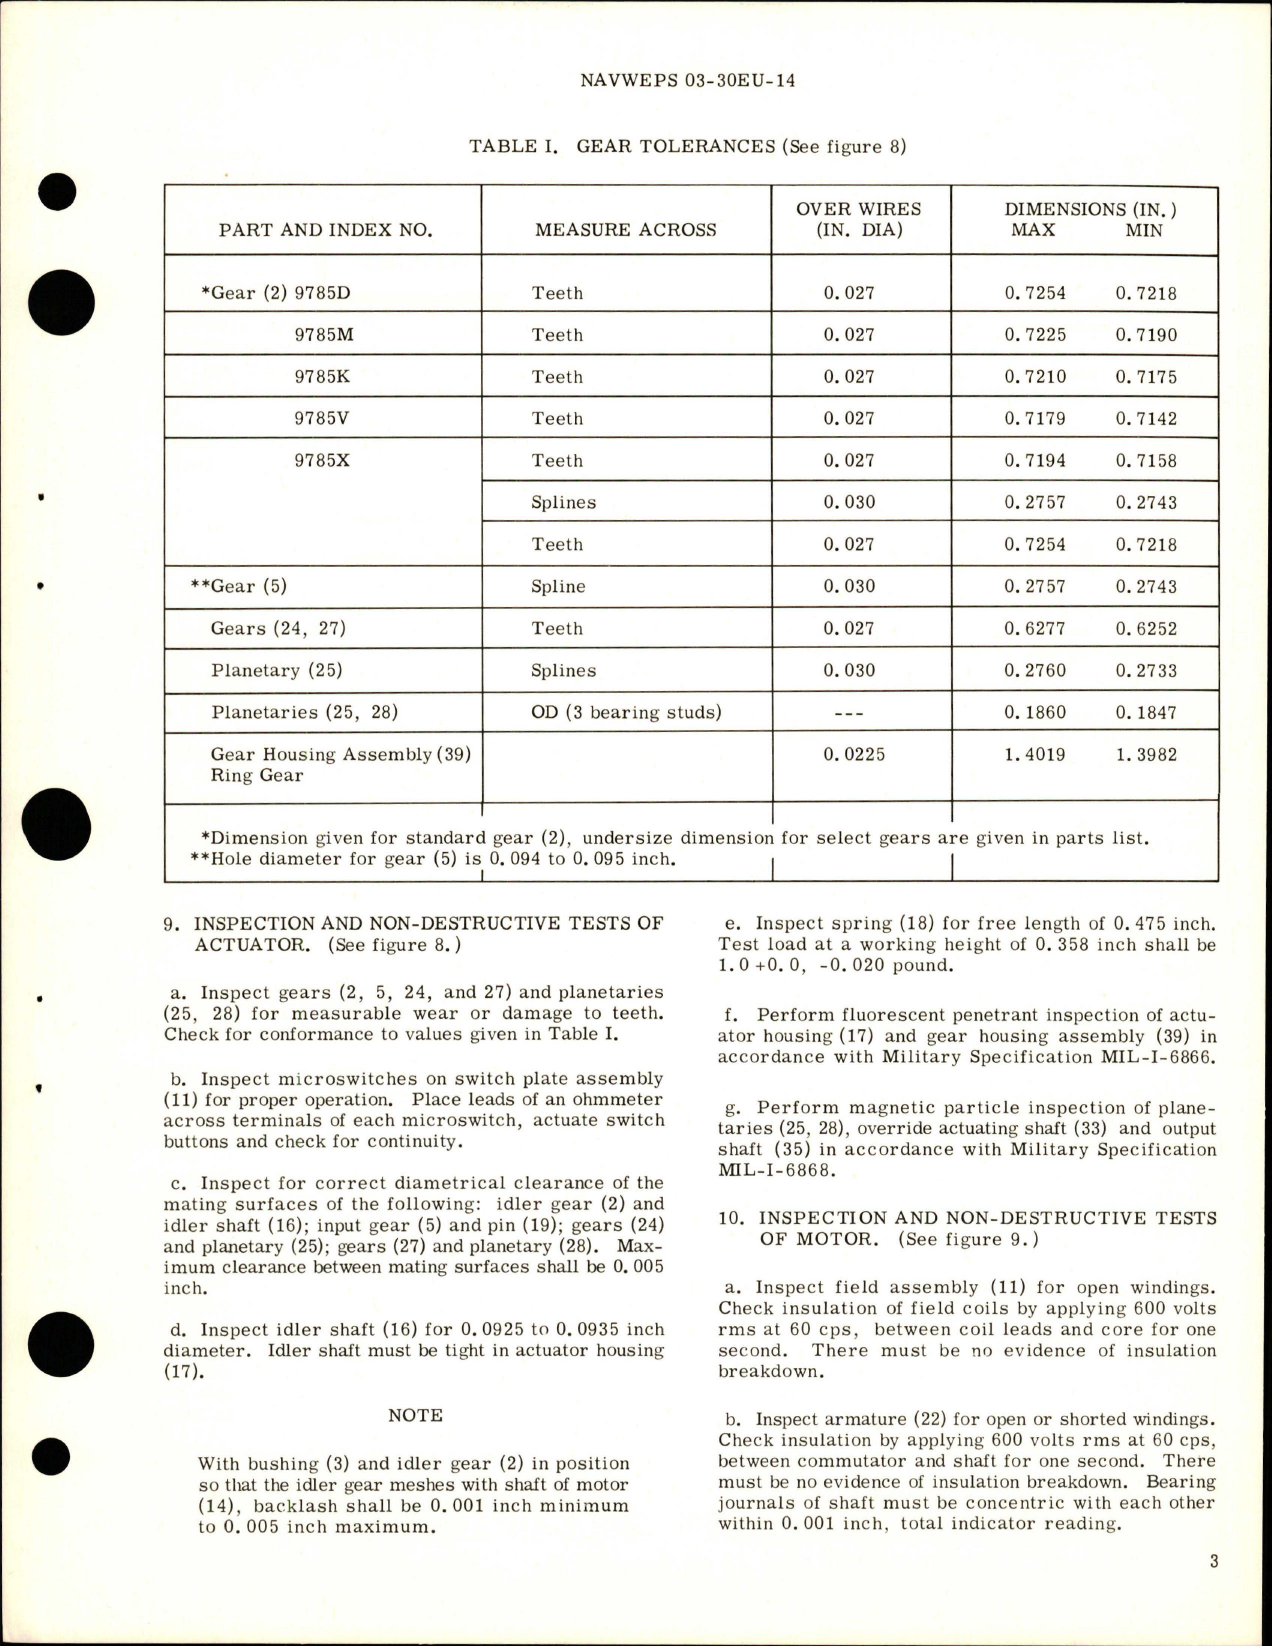 Sample page 5 from AirCorps Library document: Overhaul Instructions with Parts Breakdown for Manual Override Pull Out Type Motor Operated Gate Valve - Parts AV16B1406C and AV16B1406C2